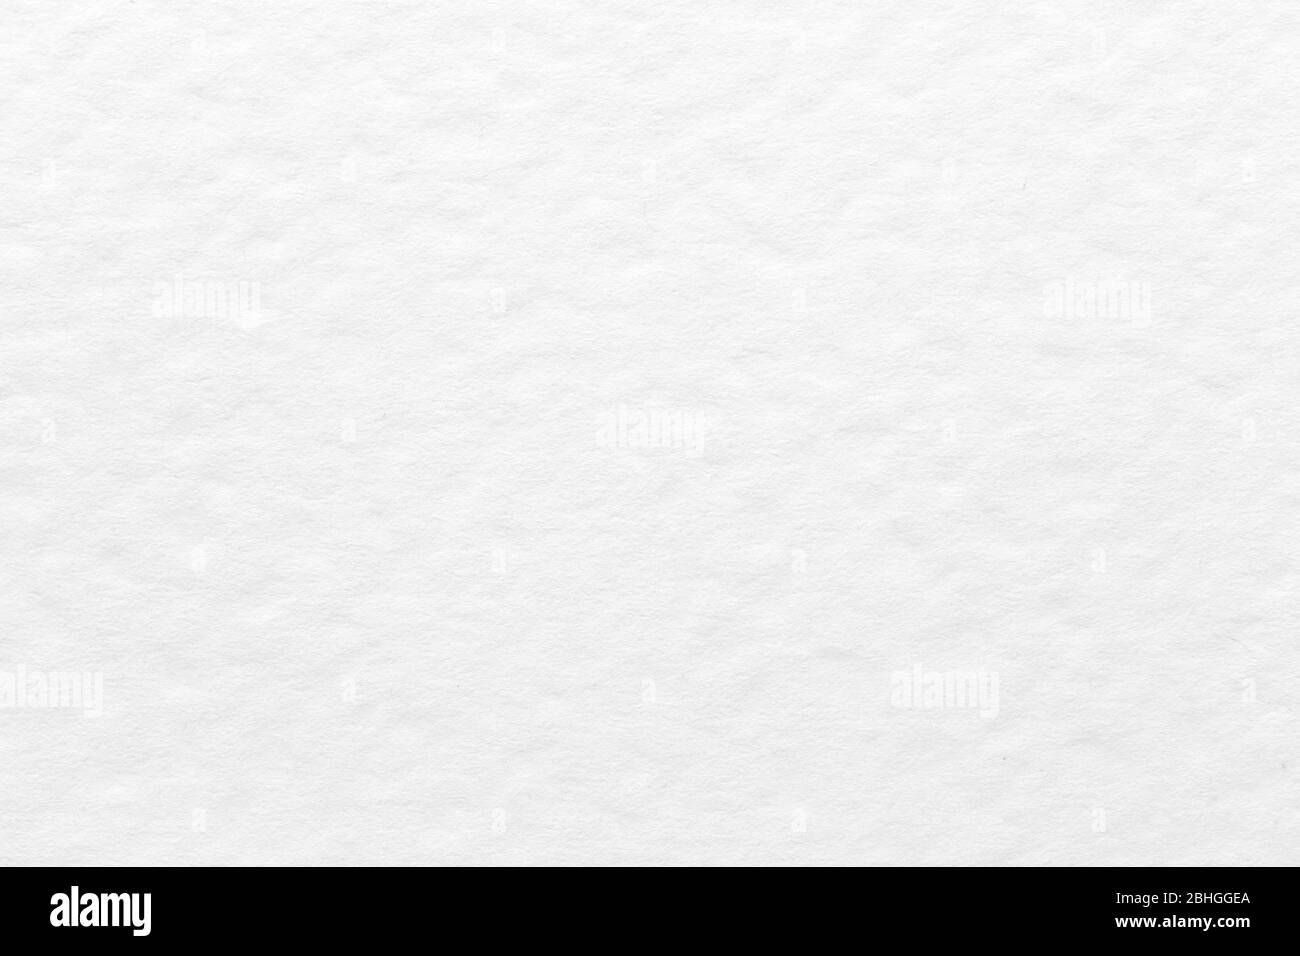 Abstract white watercolor plain paper background texture. Stock Photo